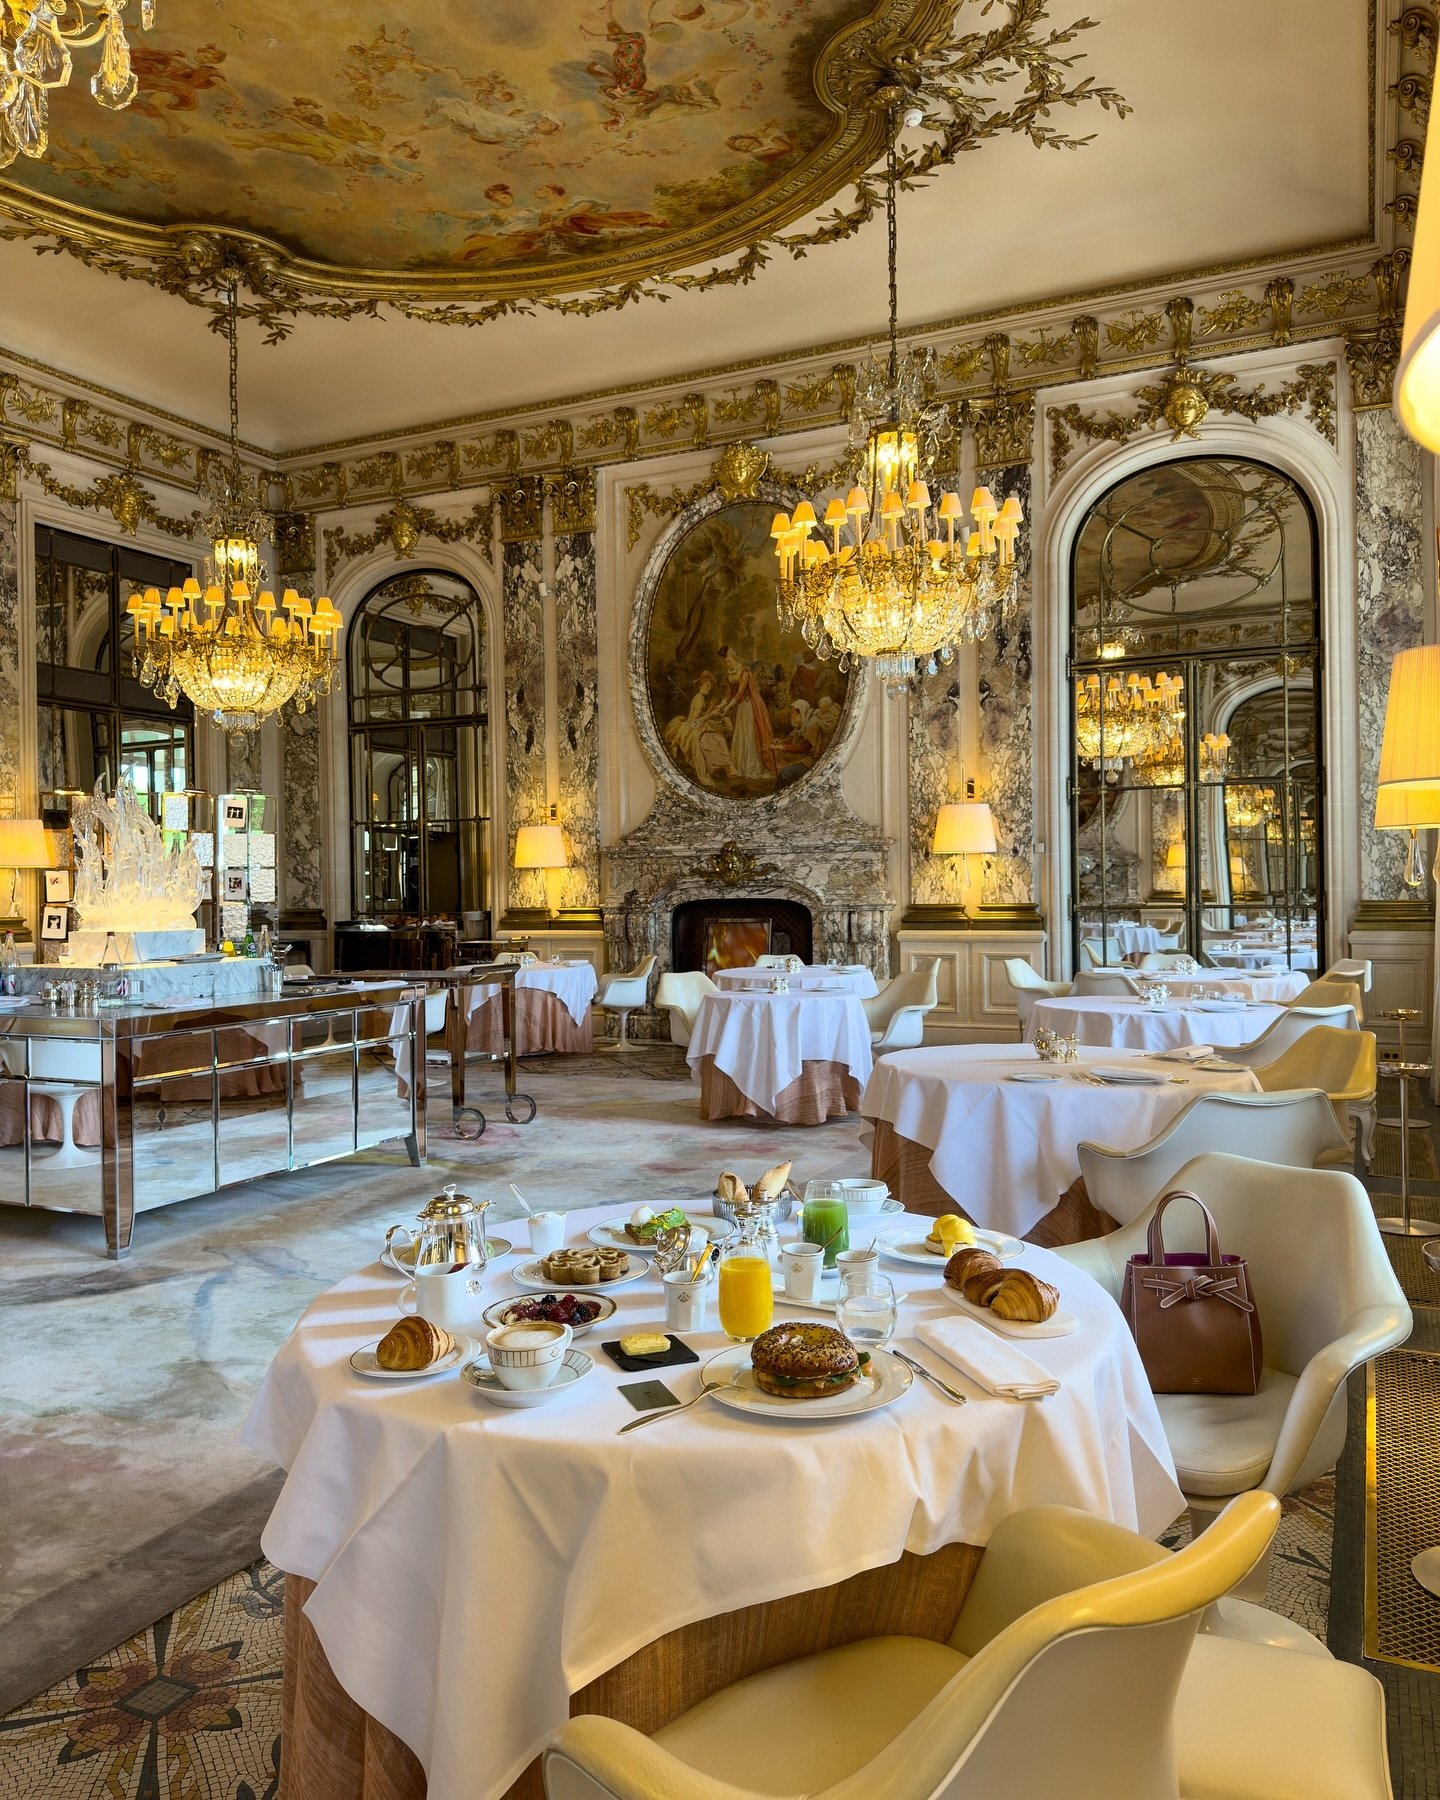 brunch in Paris with a side of Versailles ☕️🥐✨

If you&rsquo;re visiting Paris, don&rsquo;t miss booking a breakfast table at Le Maurice Alain Ducasse.
This magical setting was inspired by the Salon de la Paix at Versailles, where you&rsquo;ll get t